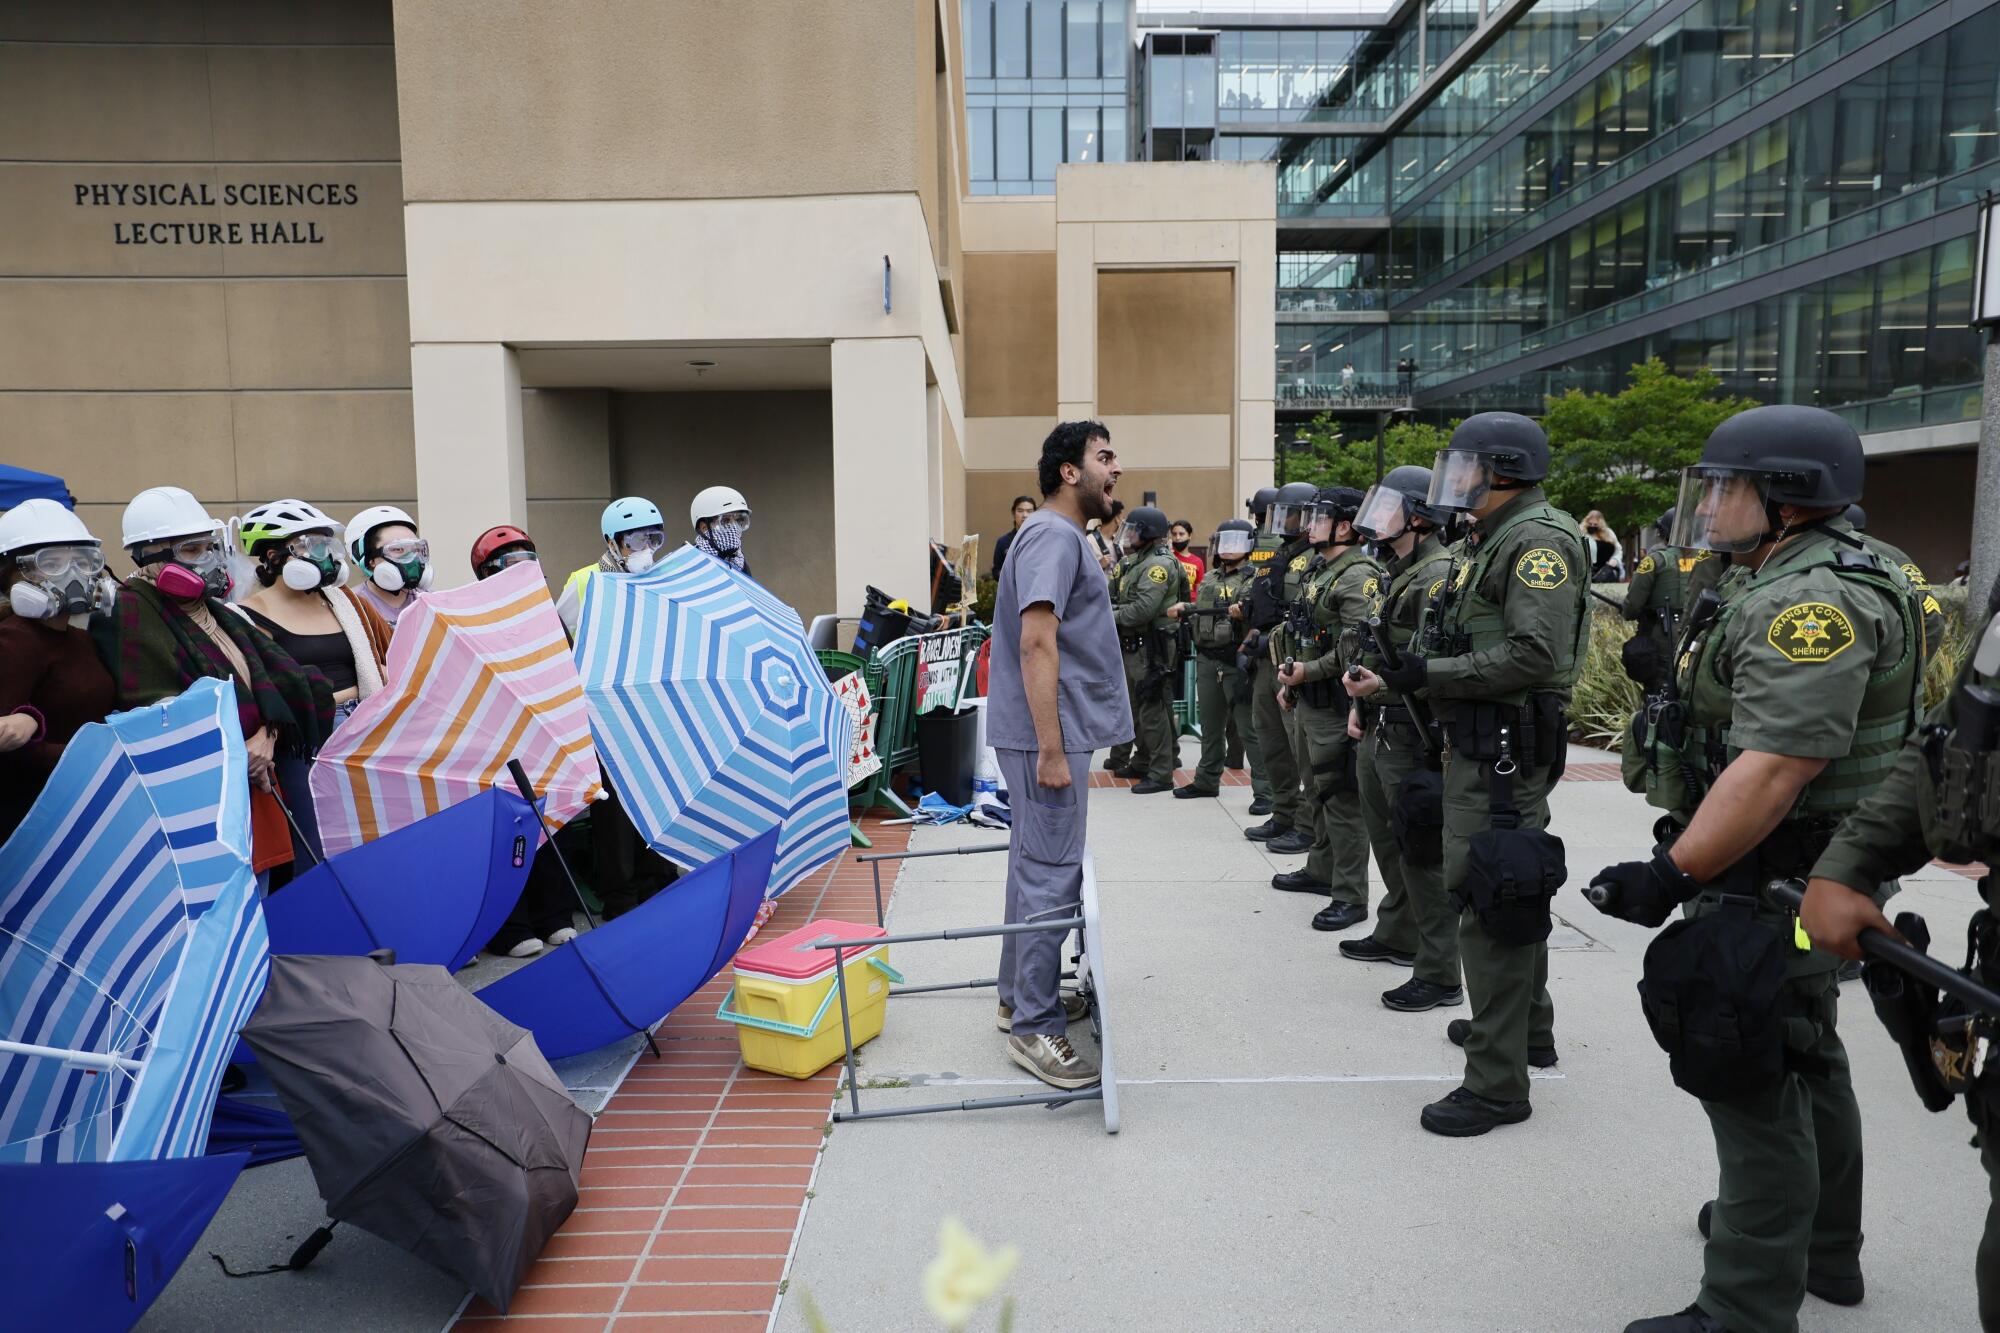 A pro-Palestinian protester confronts authorities at the ICU.